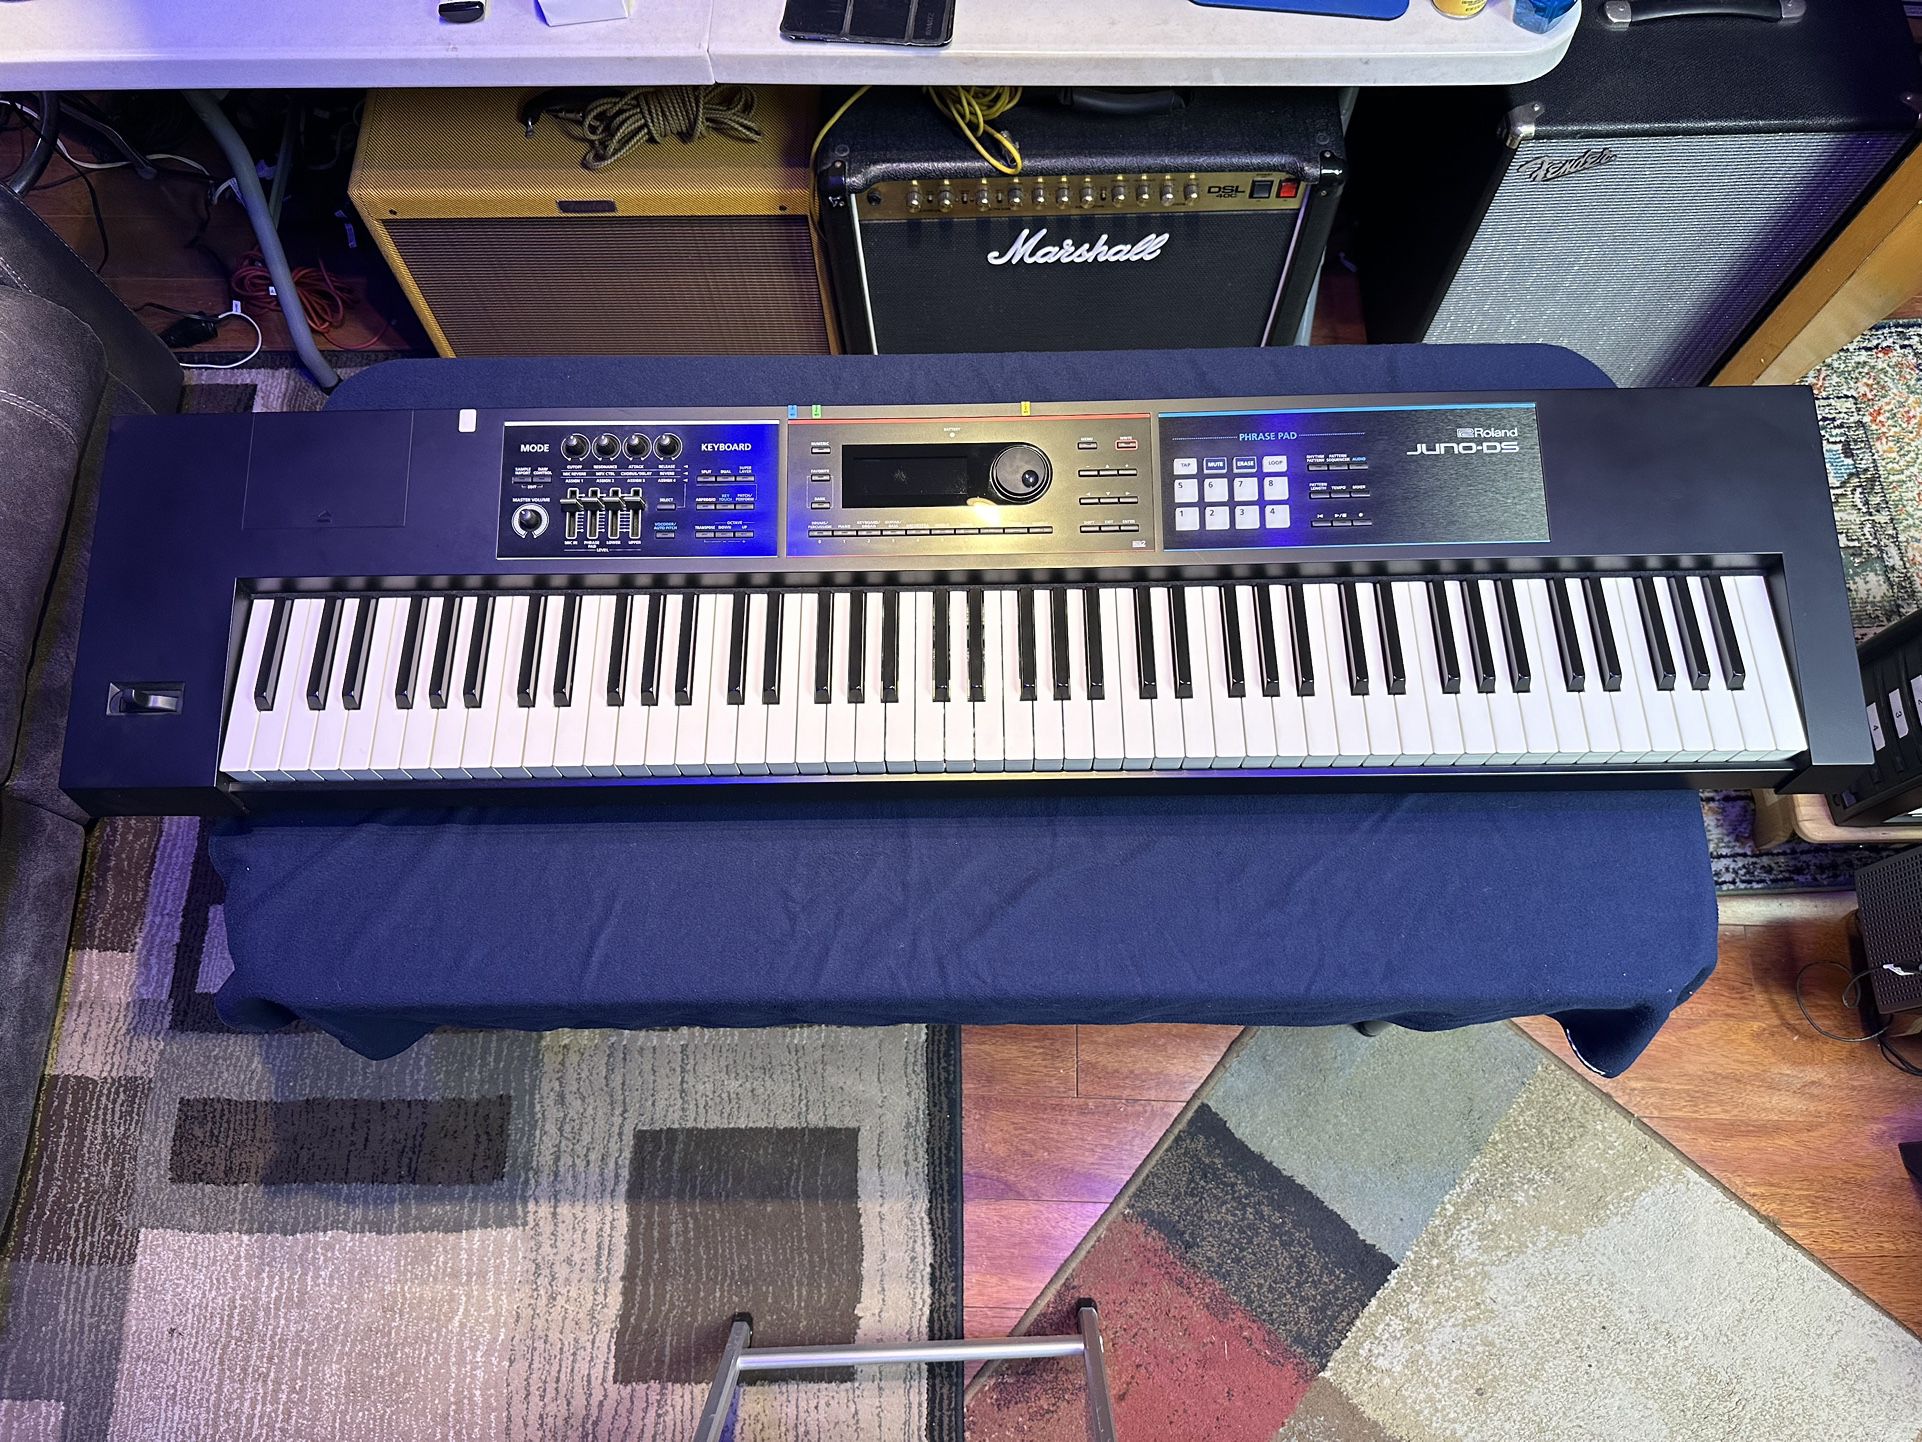 Roland JUNO-DS 88-Key Lightweight Weighted-Action Keyboard wish Pro Sounds.